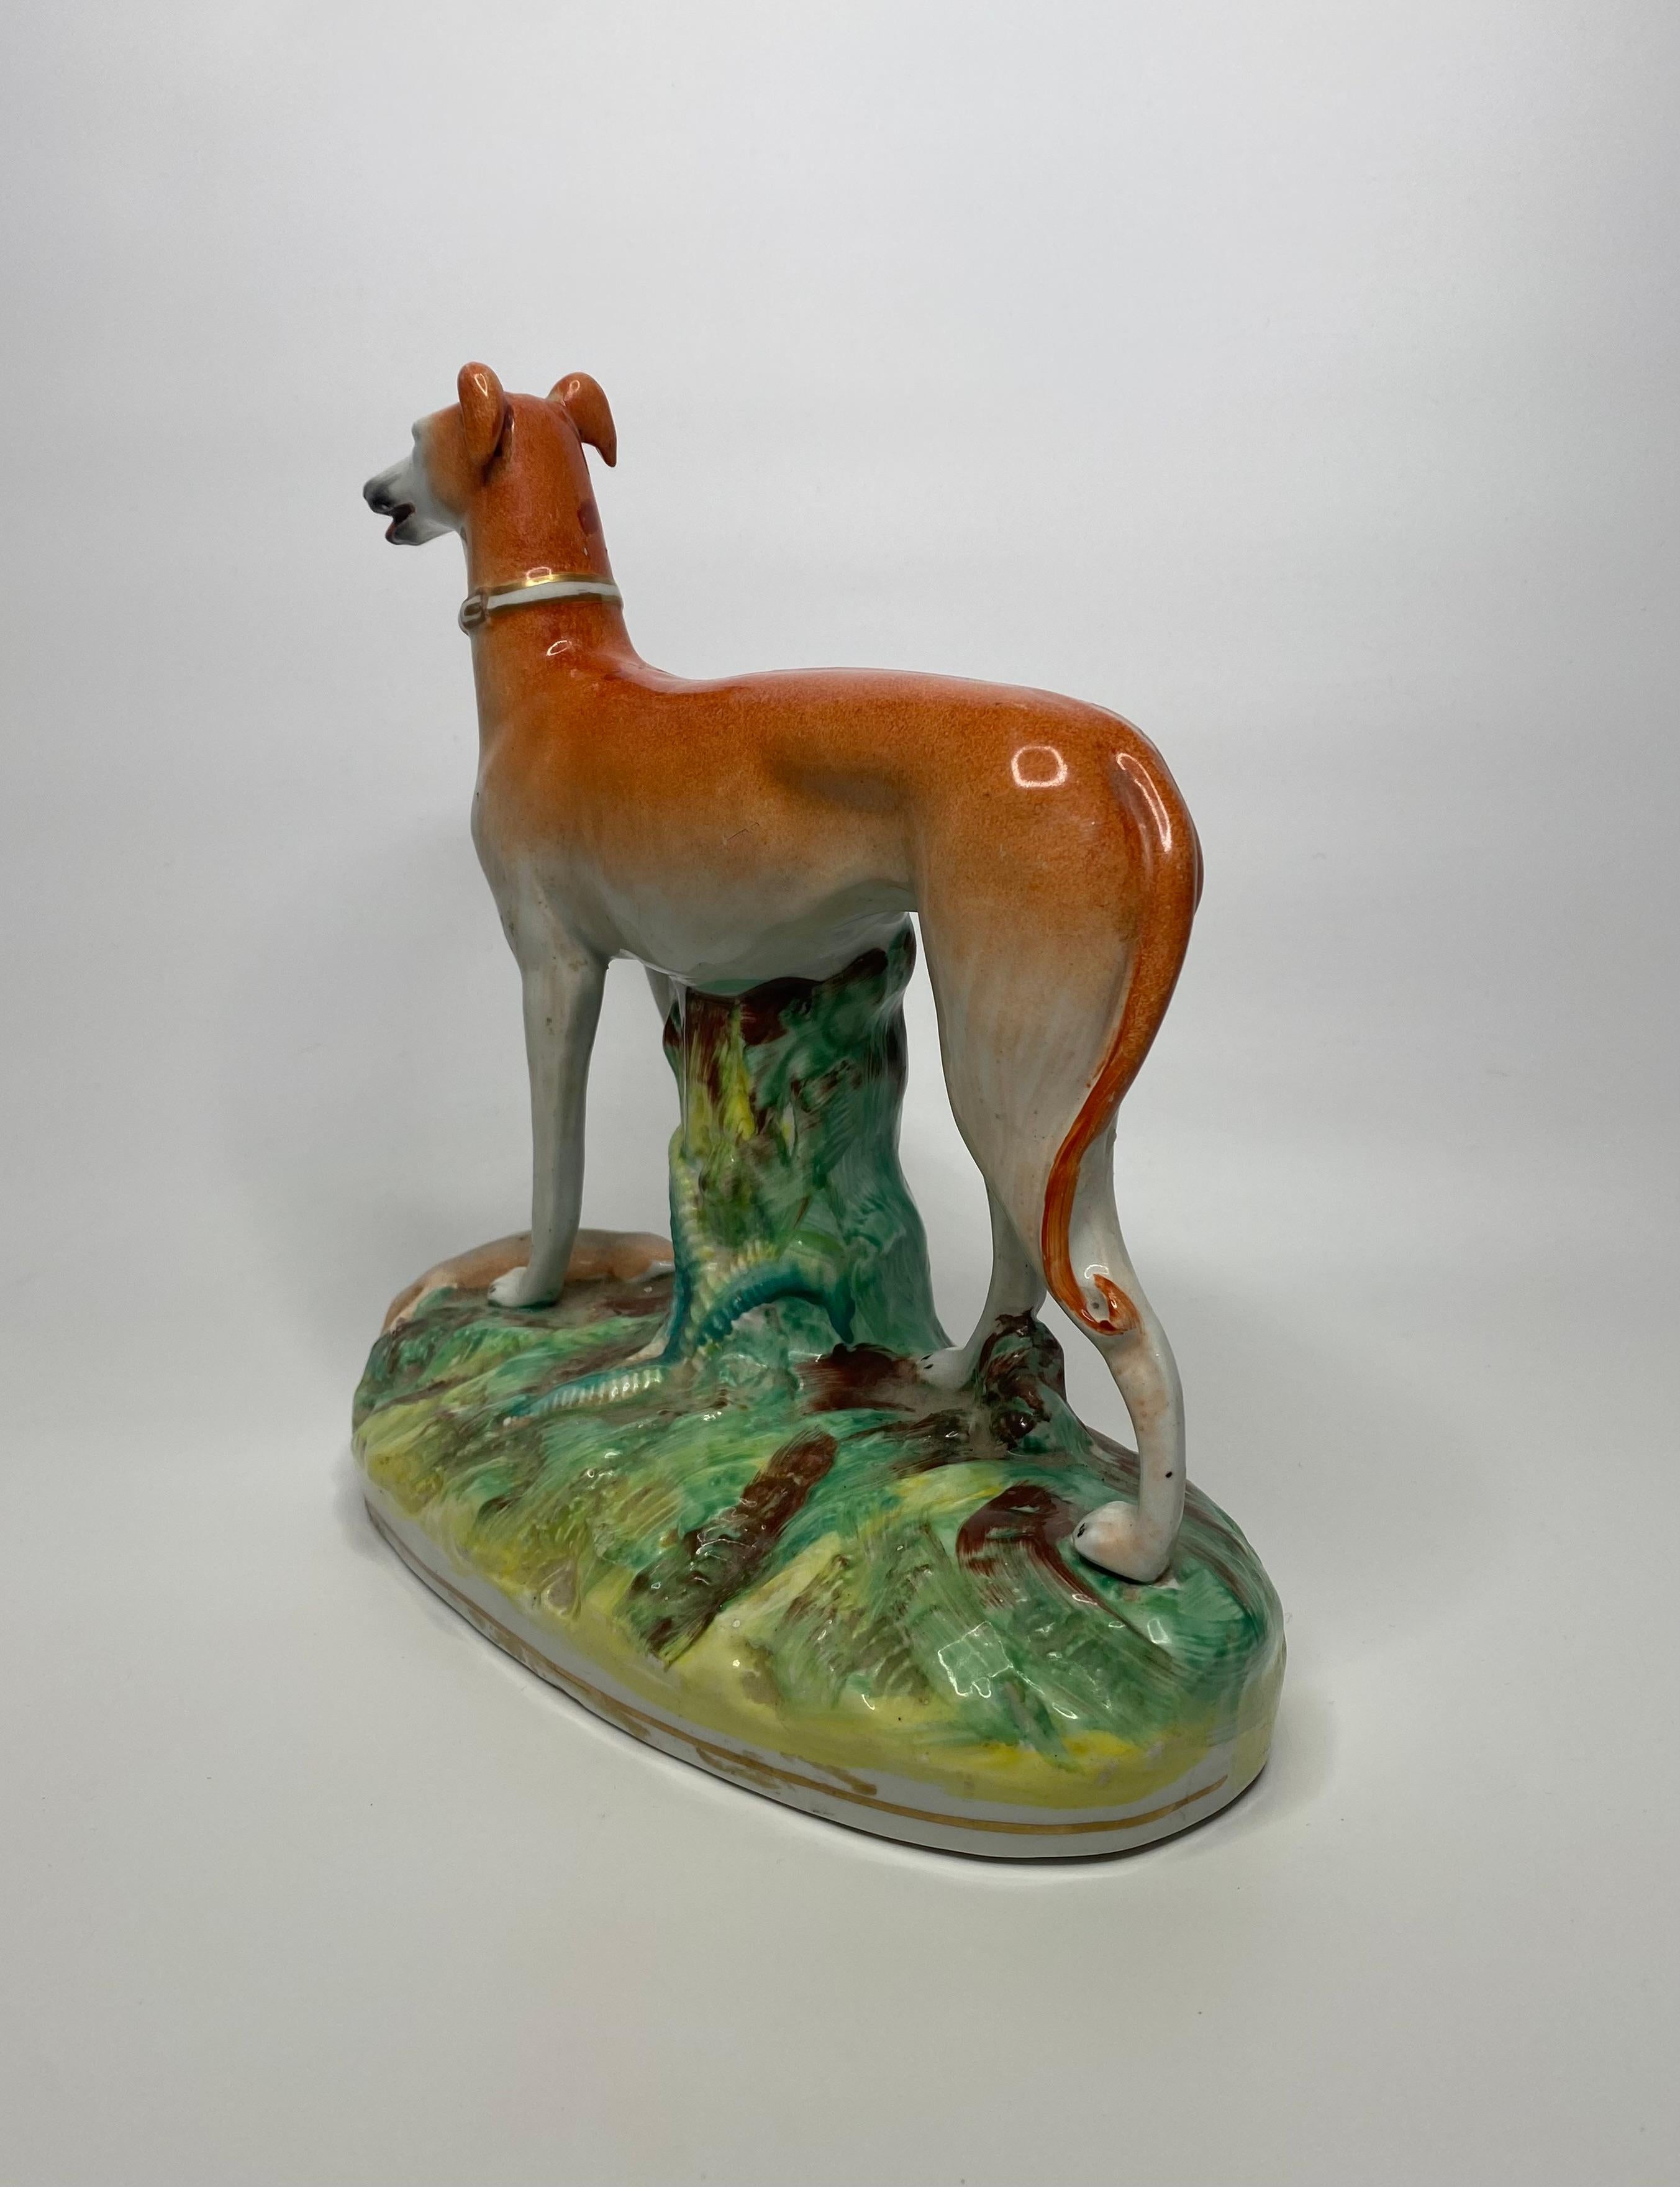 Mid-19th Century Staffordshire pottery Greyhound, Thomas Parr factory, c. 1850. For Sale